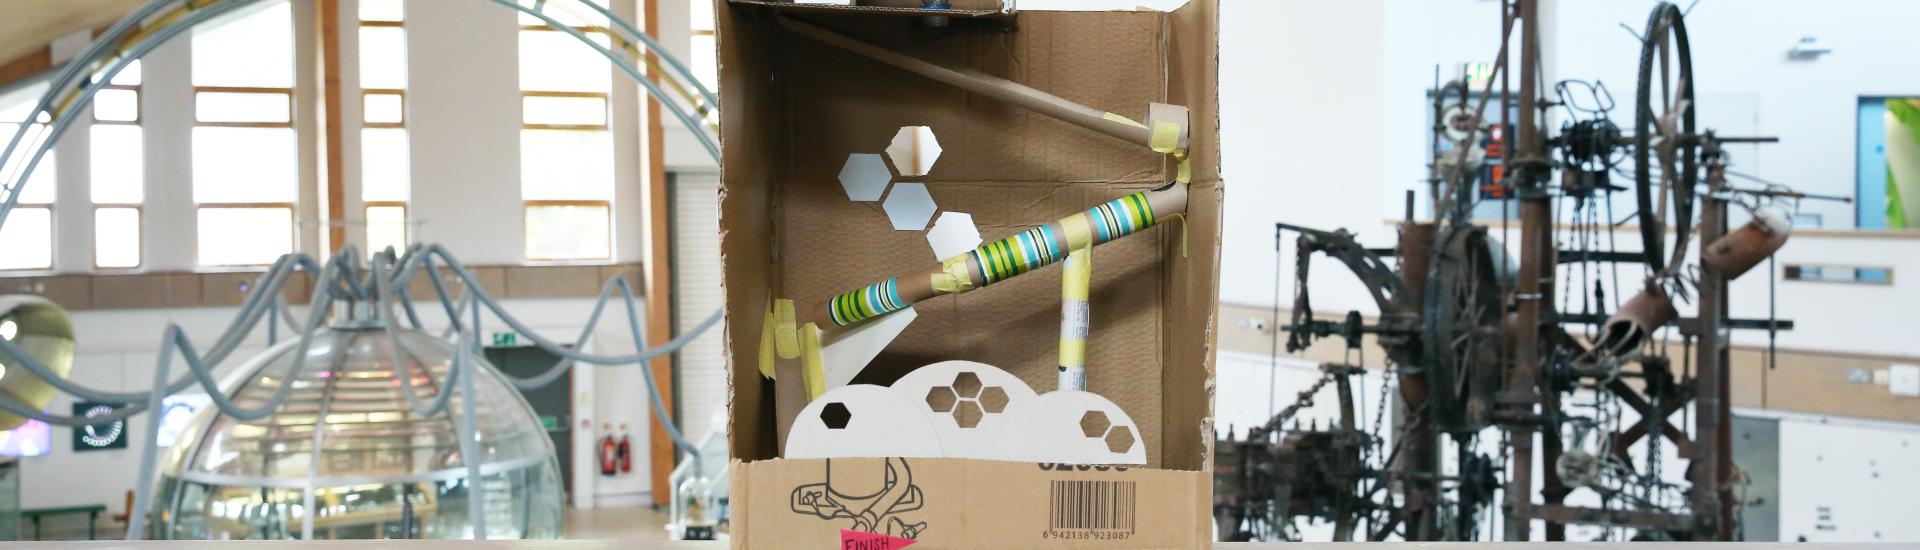 A picture of our recycled marble run made out of cardboard